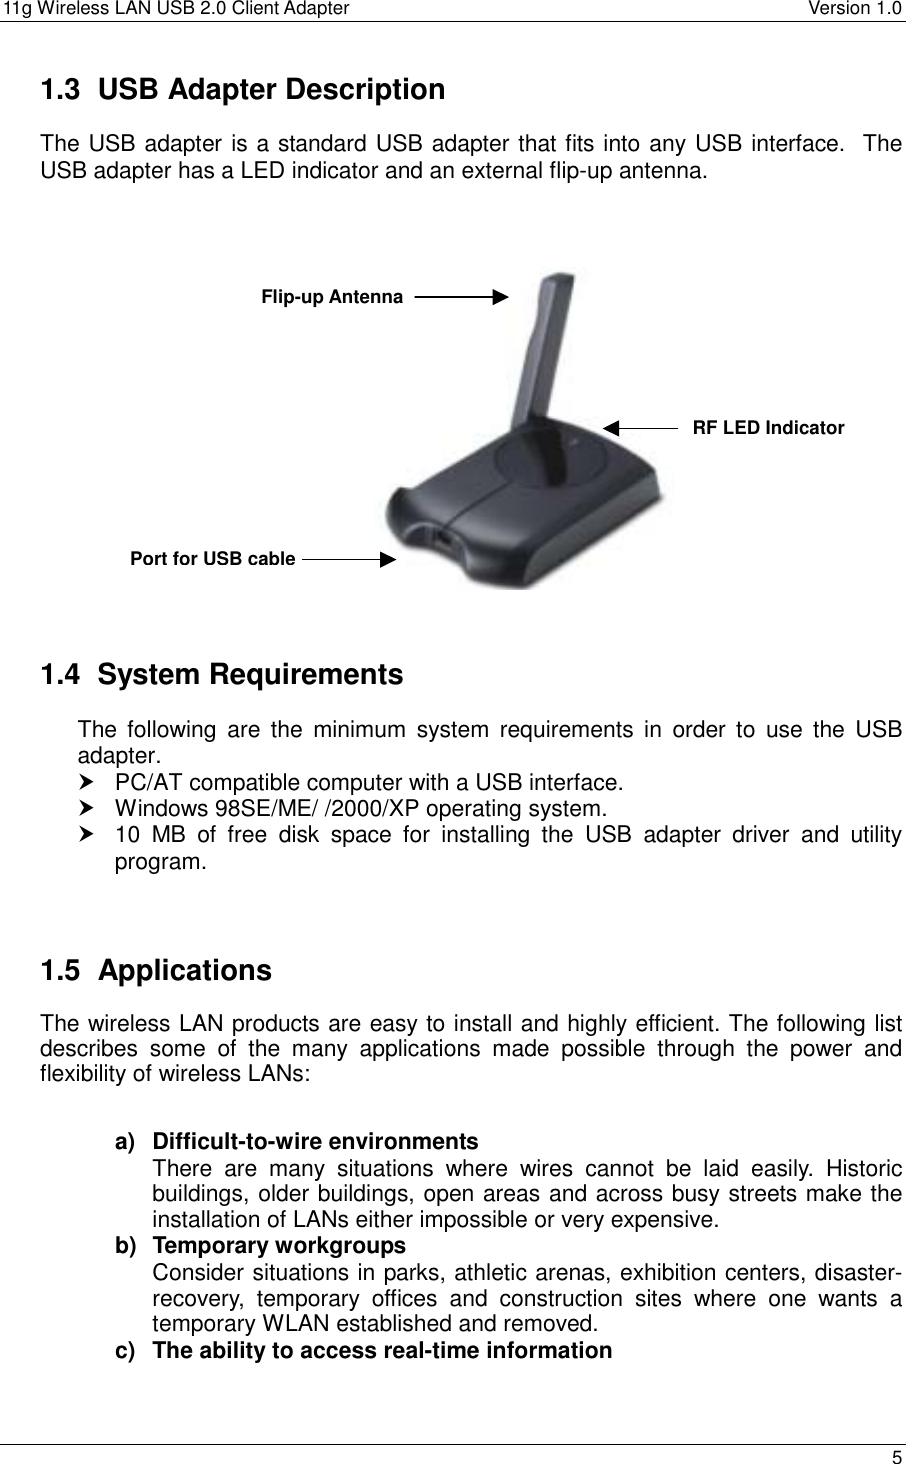 11g Wireless LAN USB 2.0 Client Adapter    Version 1.0  1.3  USB Adapter Description The USB adapter is a standard USB adapter that fits into any USB interface.  The USB adapter has a LED indicator and an external flip-up antenna.      Flip-up Antenna     RF LED Indicator      Port for USB cable    1.4 System Requirements The following are the minimum system requirements in order to use the USB adapter.  PC/AT compatible computer with a USB interface.  Windows 98SE/ME/ /2000/XP operating system.  10 MB of free disk space for installing the USB adapter driver and utility program.    1.5 Applications The wireless LAN products are easy to install and highly efficient. The following list describes some of the many applications made possible through the power and flexibility of wireless LANs:   a) Difficult-to-wire environments There are many situations where wires cannot be laid easily. Historic buildings, older buildings, open areas and across busy streets make the installation of LANs either impossible or very expensive. b) Temporary workgroups Consider situations in parks, athletic arenas, exhibition centers, disaster-recovery, temporary offices and construction sites where one wants a temporary WLAN established and removed. c)  The ability to access real-time information  5  